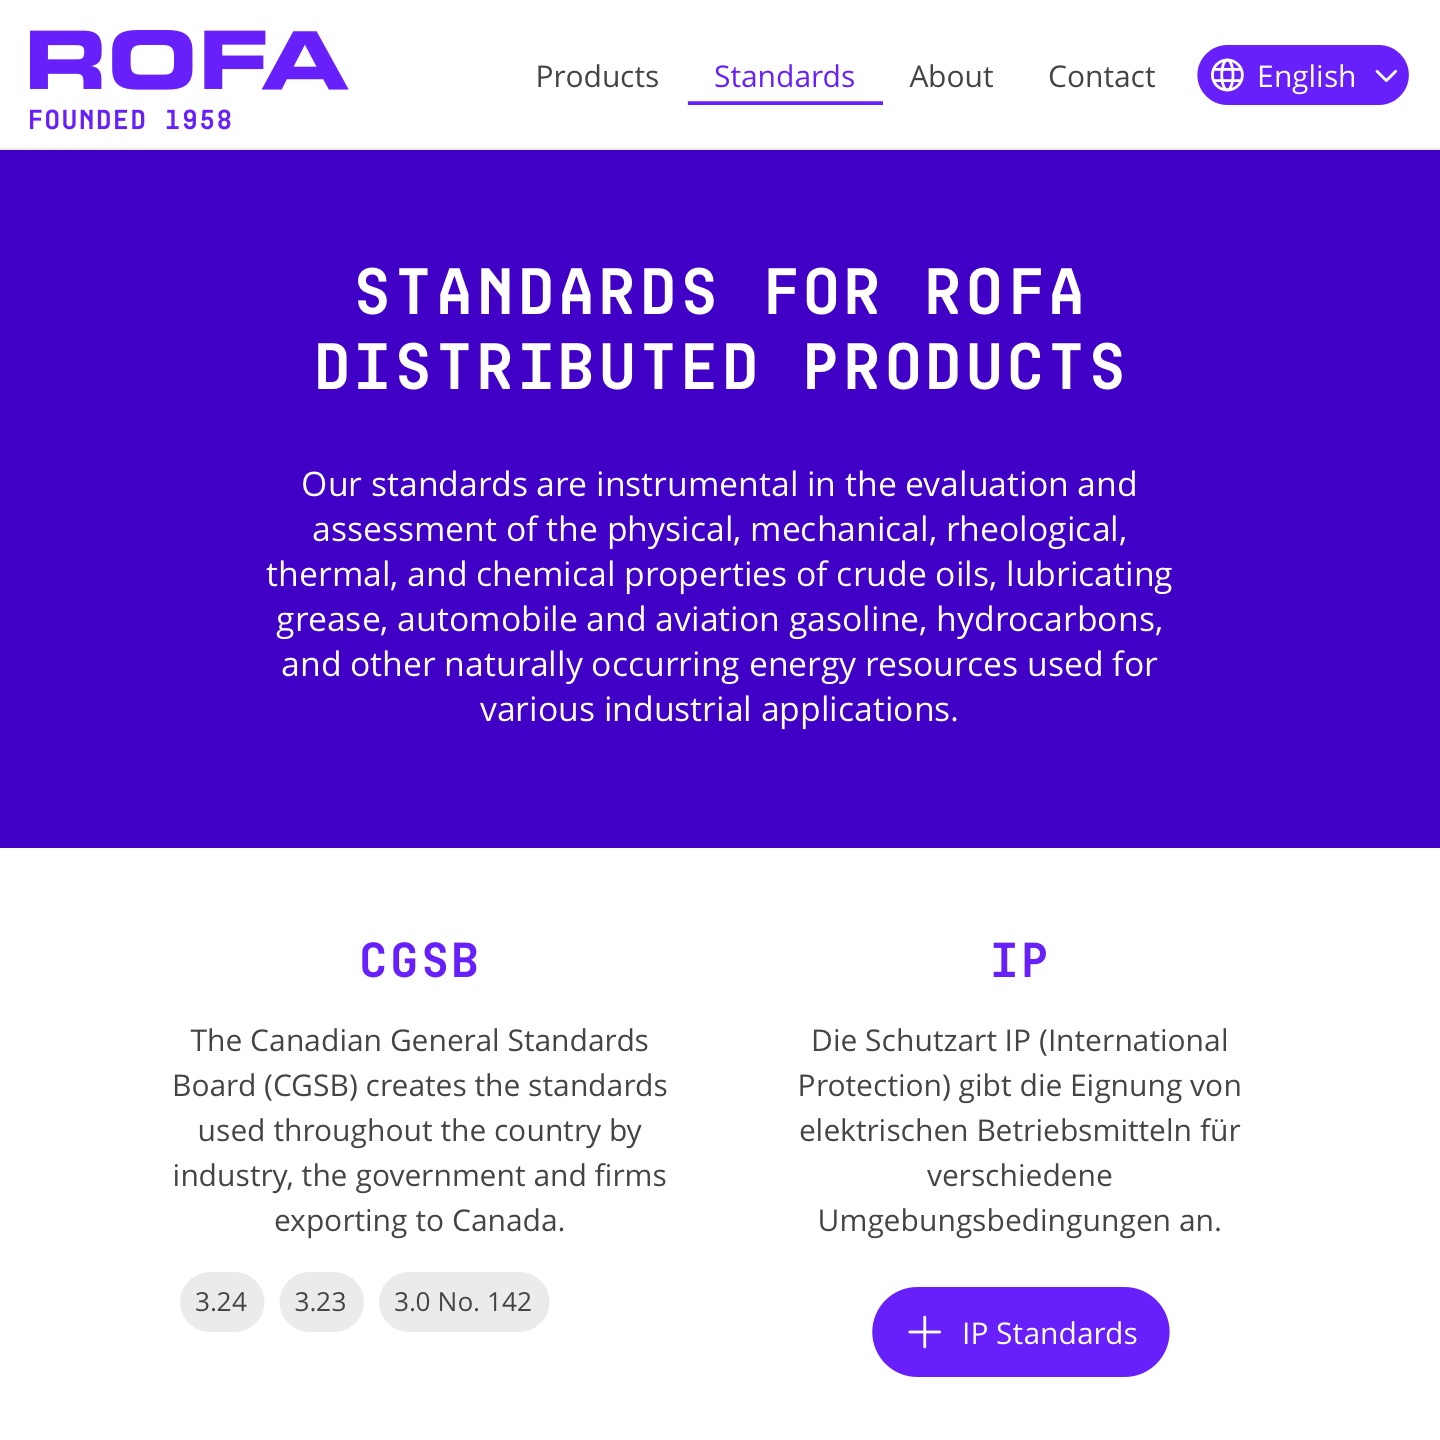 Webdesign of the page "Standards" of rofa.at